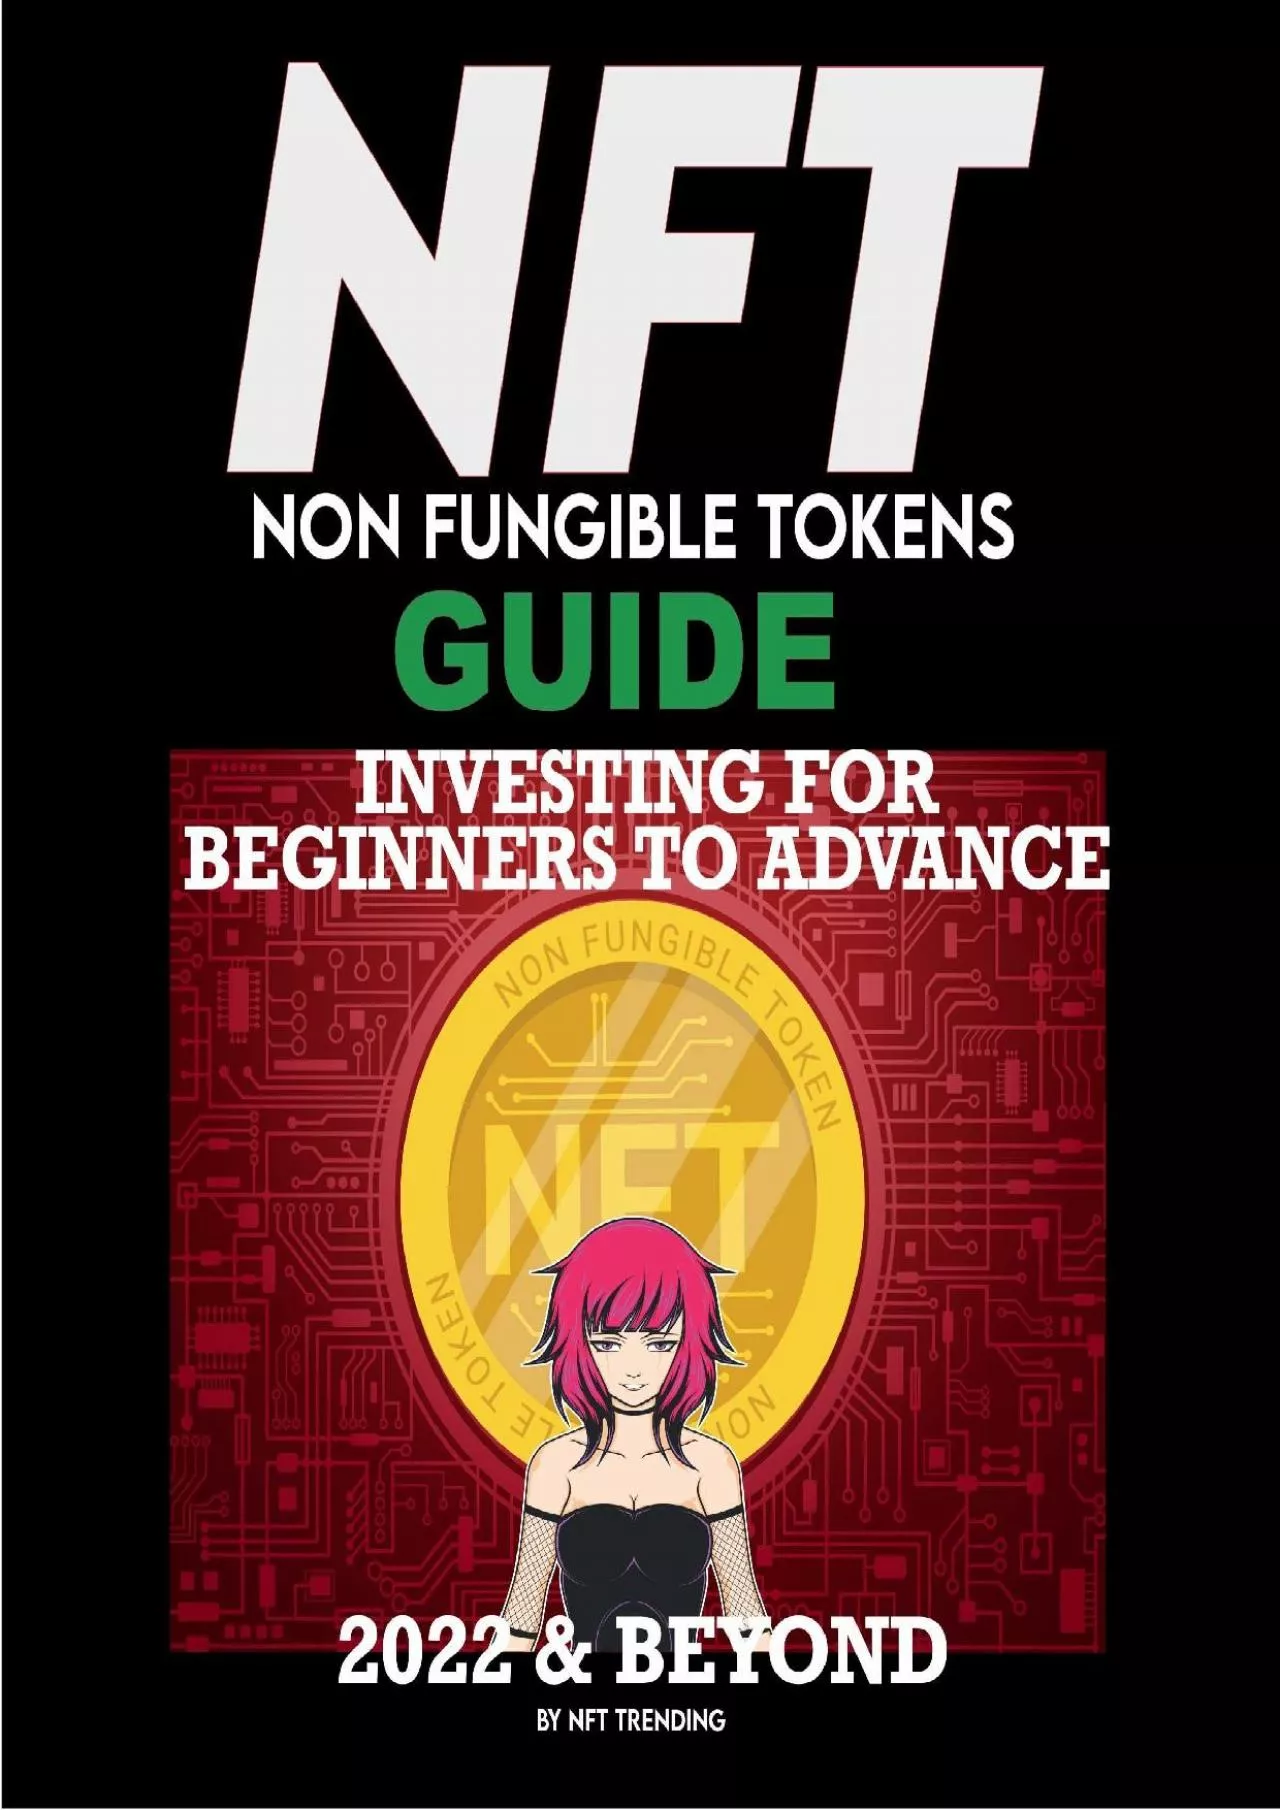 (BOOK)-NFT (Non Fungible Tokens) Investing Guide for Beginners to Advance 2022 & Beyond: